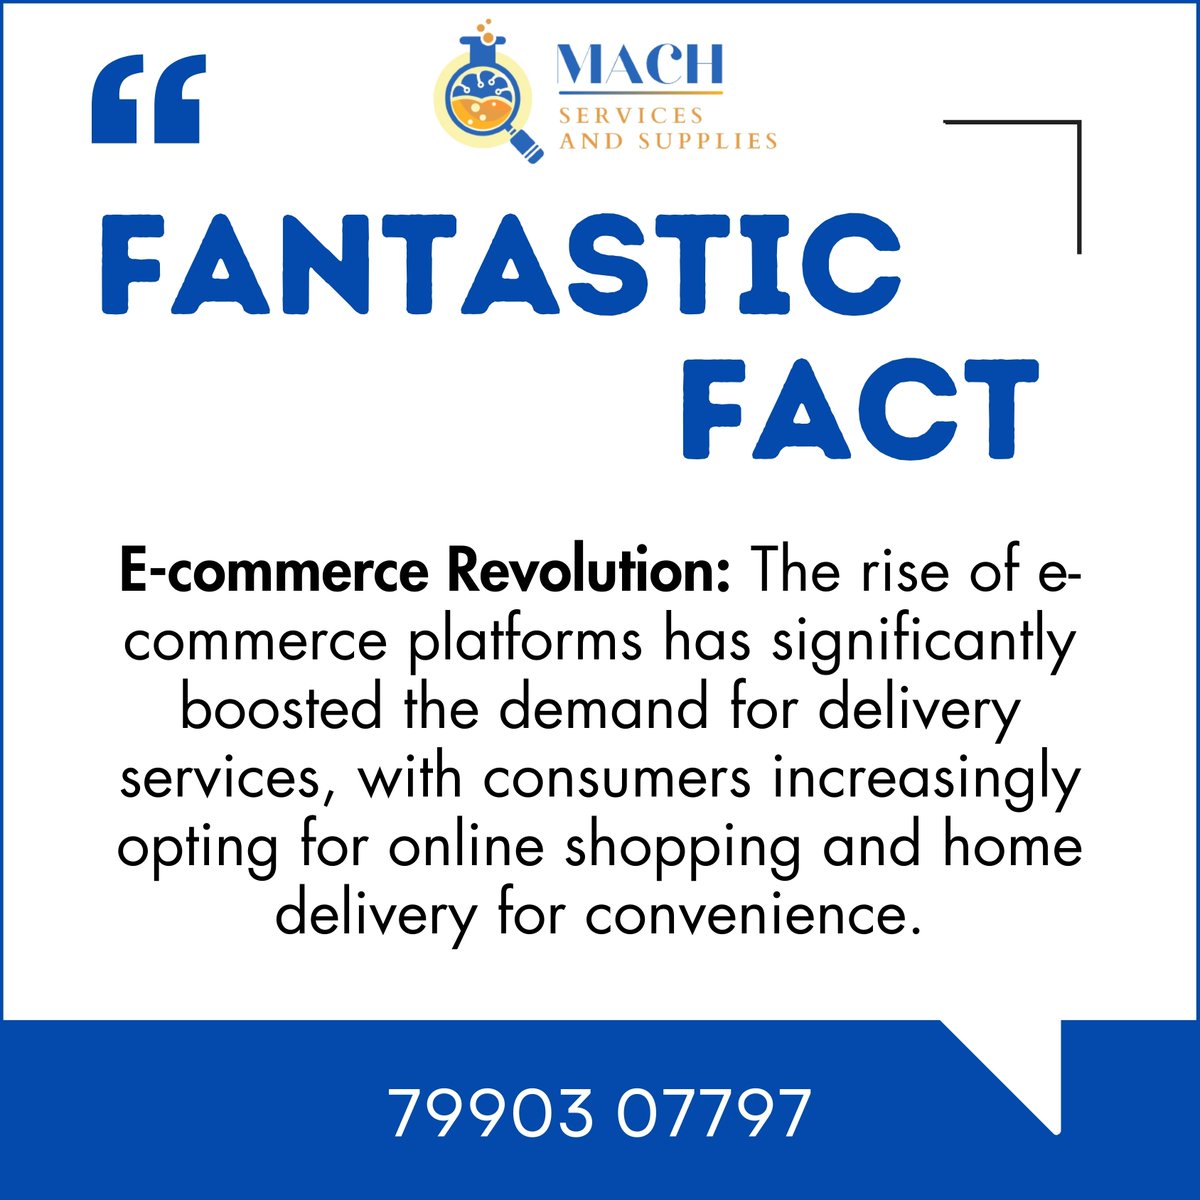 Delivery Services : Fantastic Fact.
.
.
#delivery #machservicesandsupplies #machservices #deliveryservice #style #love #instagood #like #photography #motivation #motivationalquotes #inspiration #surat #suratcity #suratfood #suratphotoclub #sunofcitysurat #sürat #wearehiring #grow